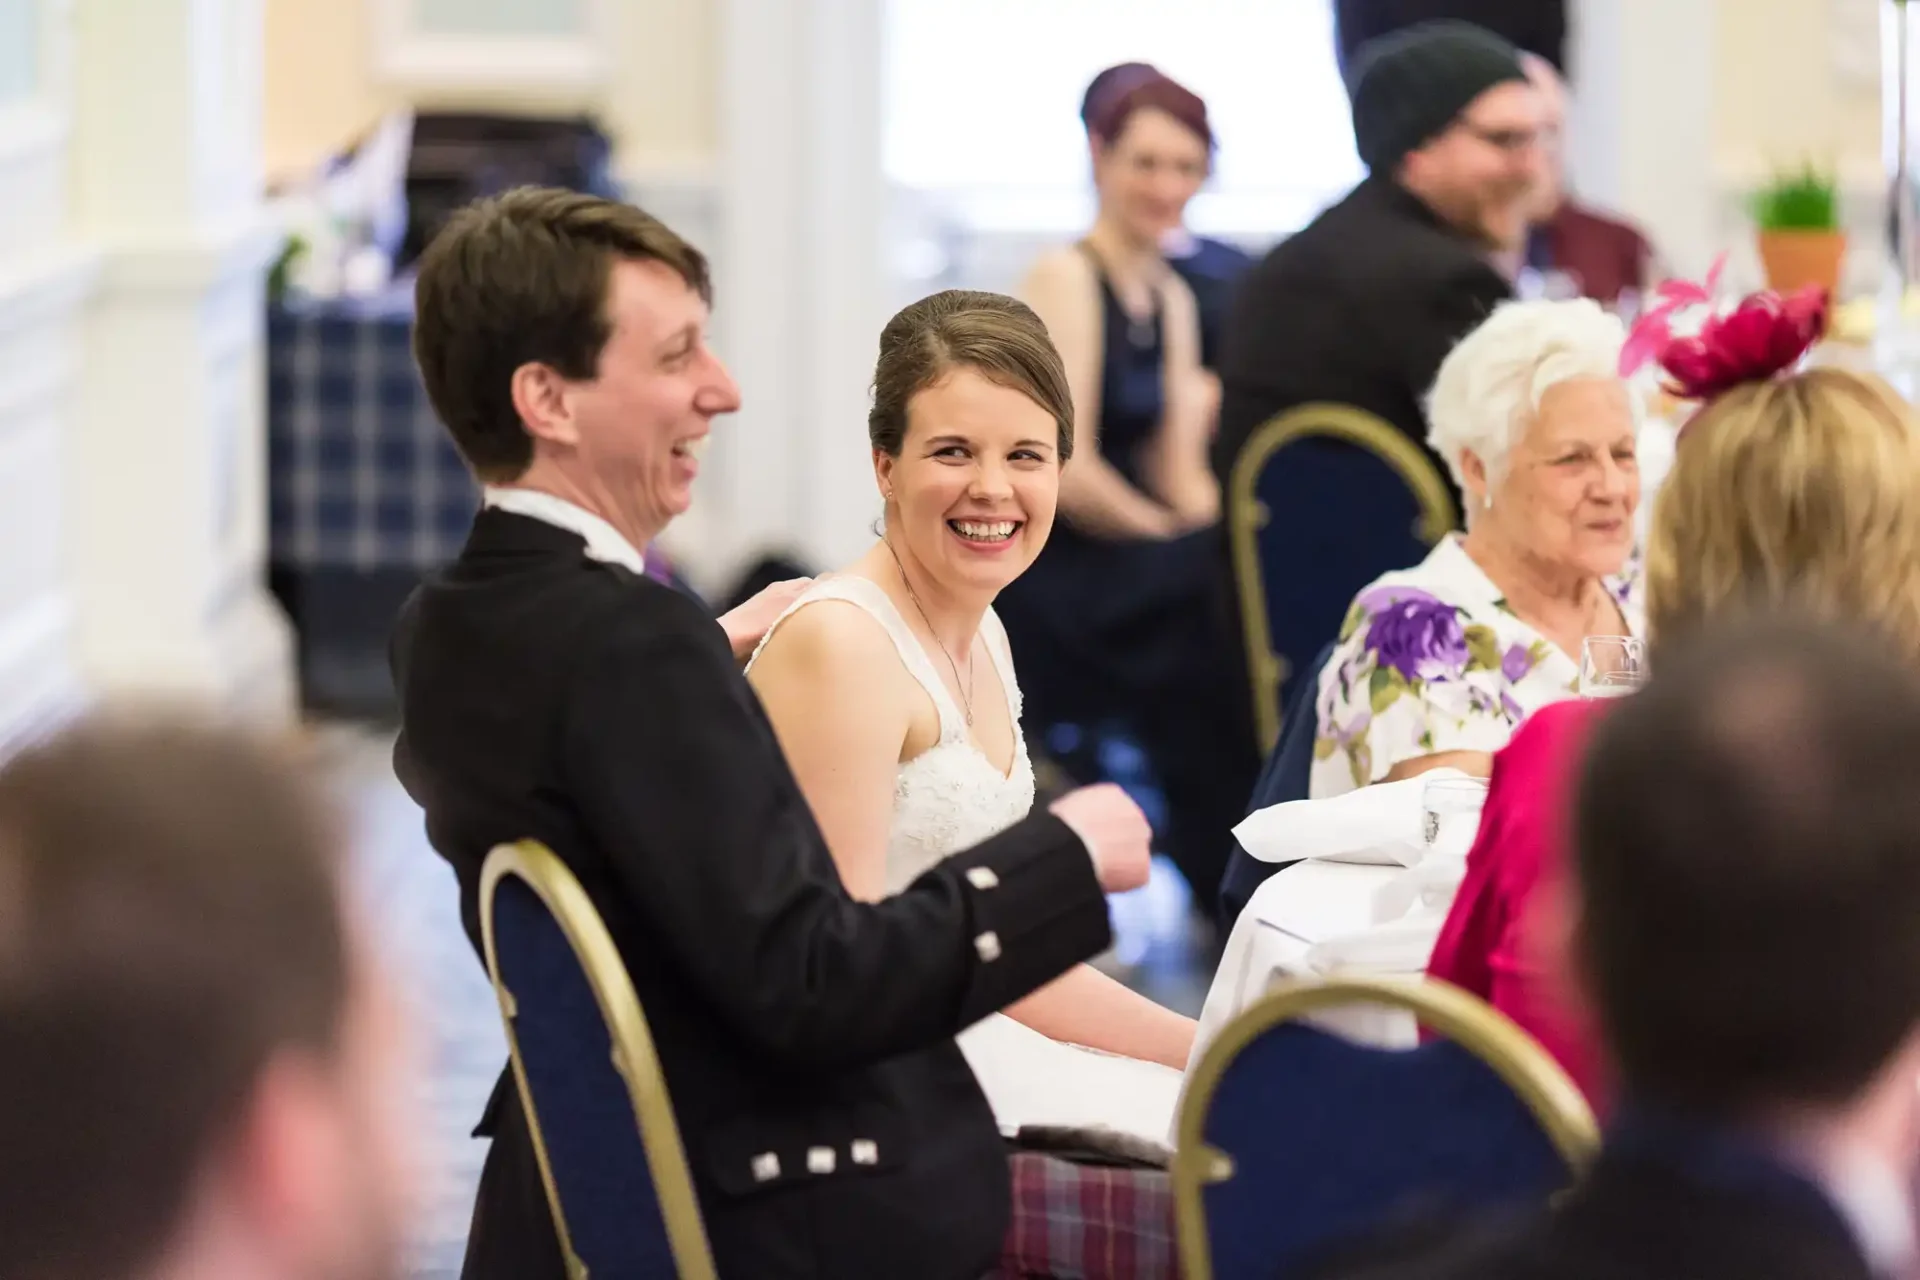 A bride and groom laugh joyfully at a wedding reception table, surrounded by guests in a brightly lit room.